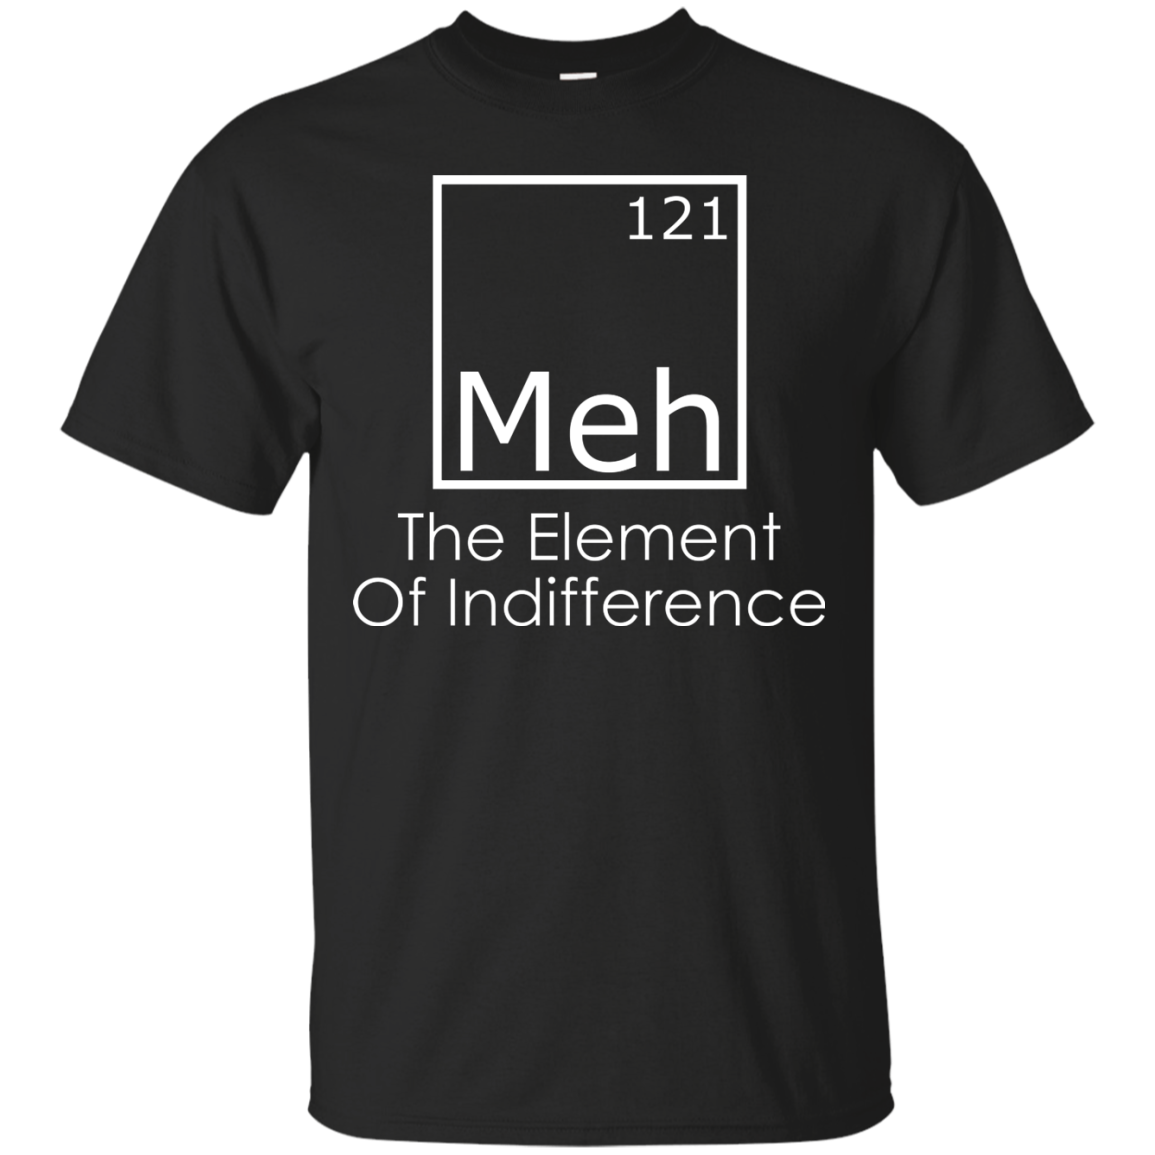 Meh - The Element of Indifference